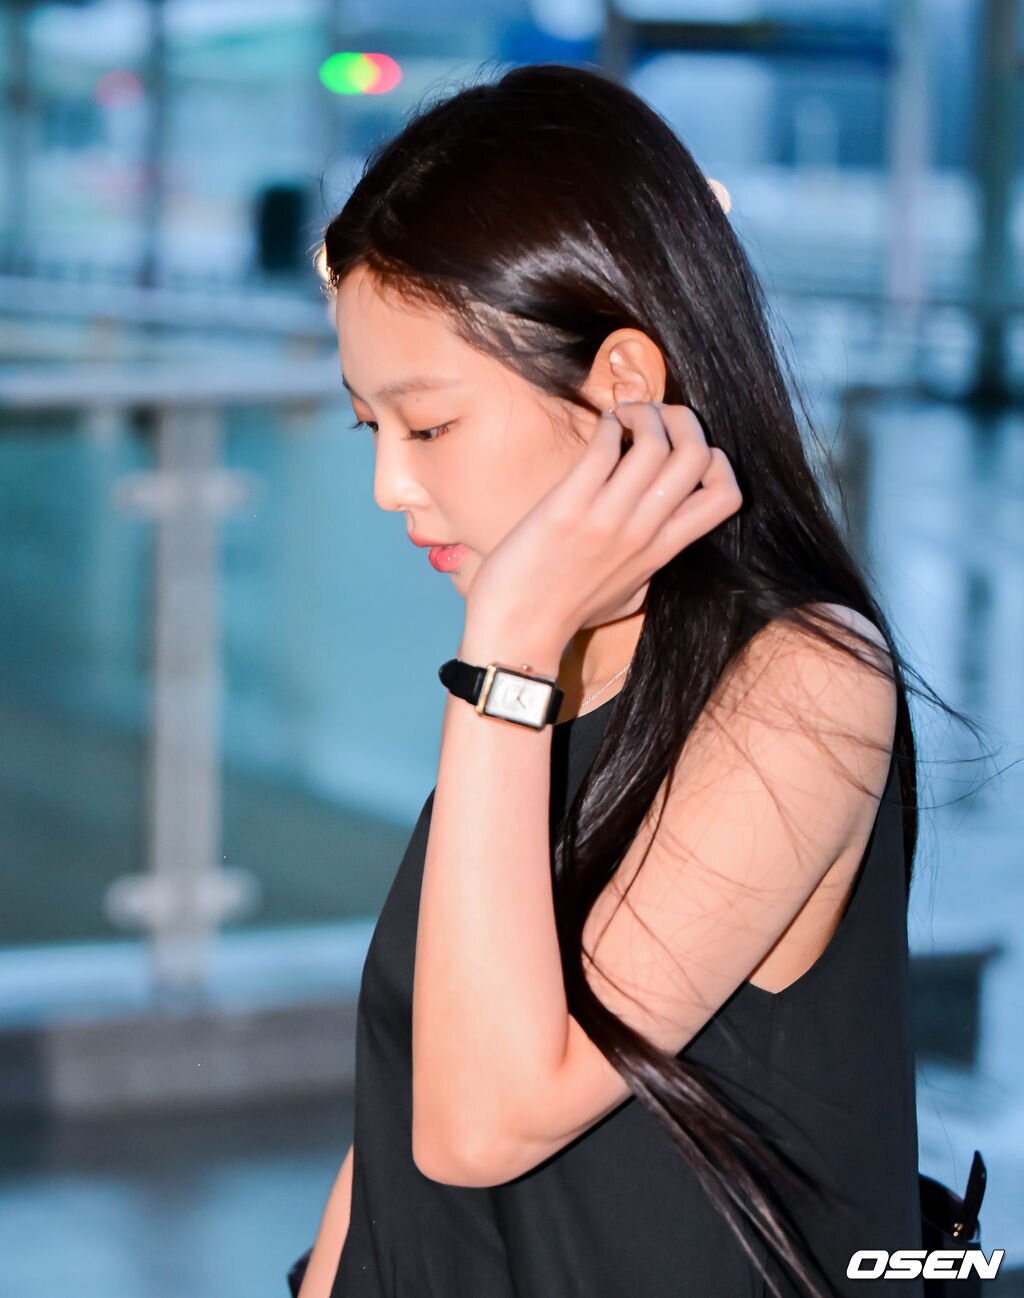 X 上的ᴱᴬᴿᵀᴴ ᴶᴱᴺᴺᴵᴱ：「Chanel released official photos of Jennie appearance in  ICN airport go to Paris Jennie showed off her fashionista side. The white  long trench coat worn by Jenni